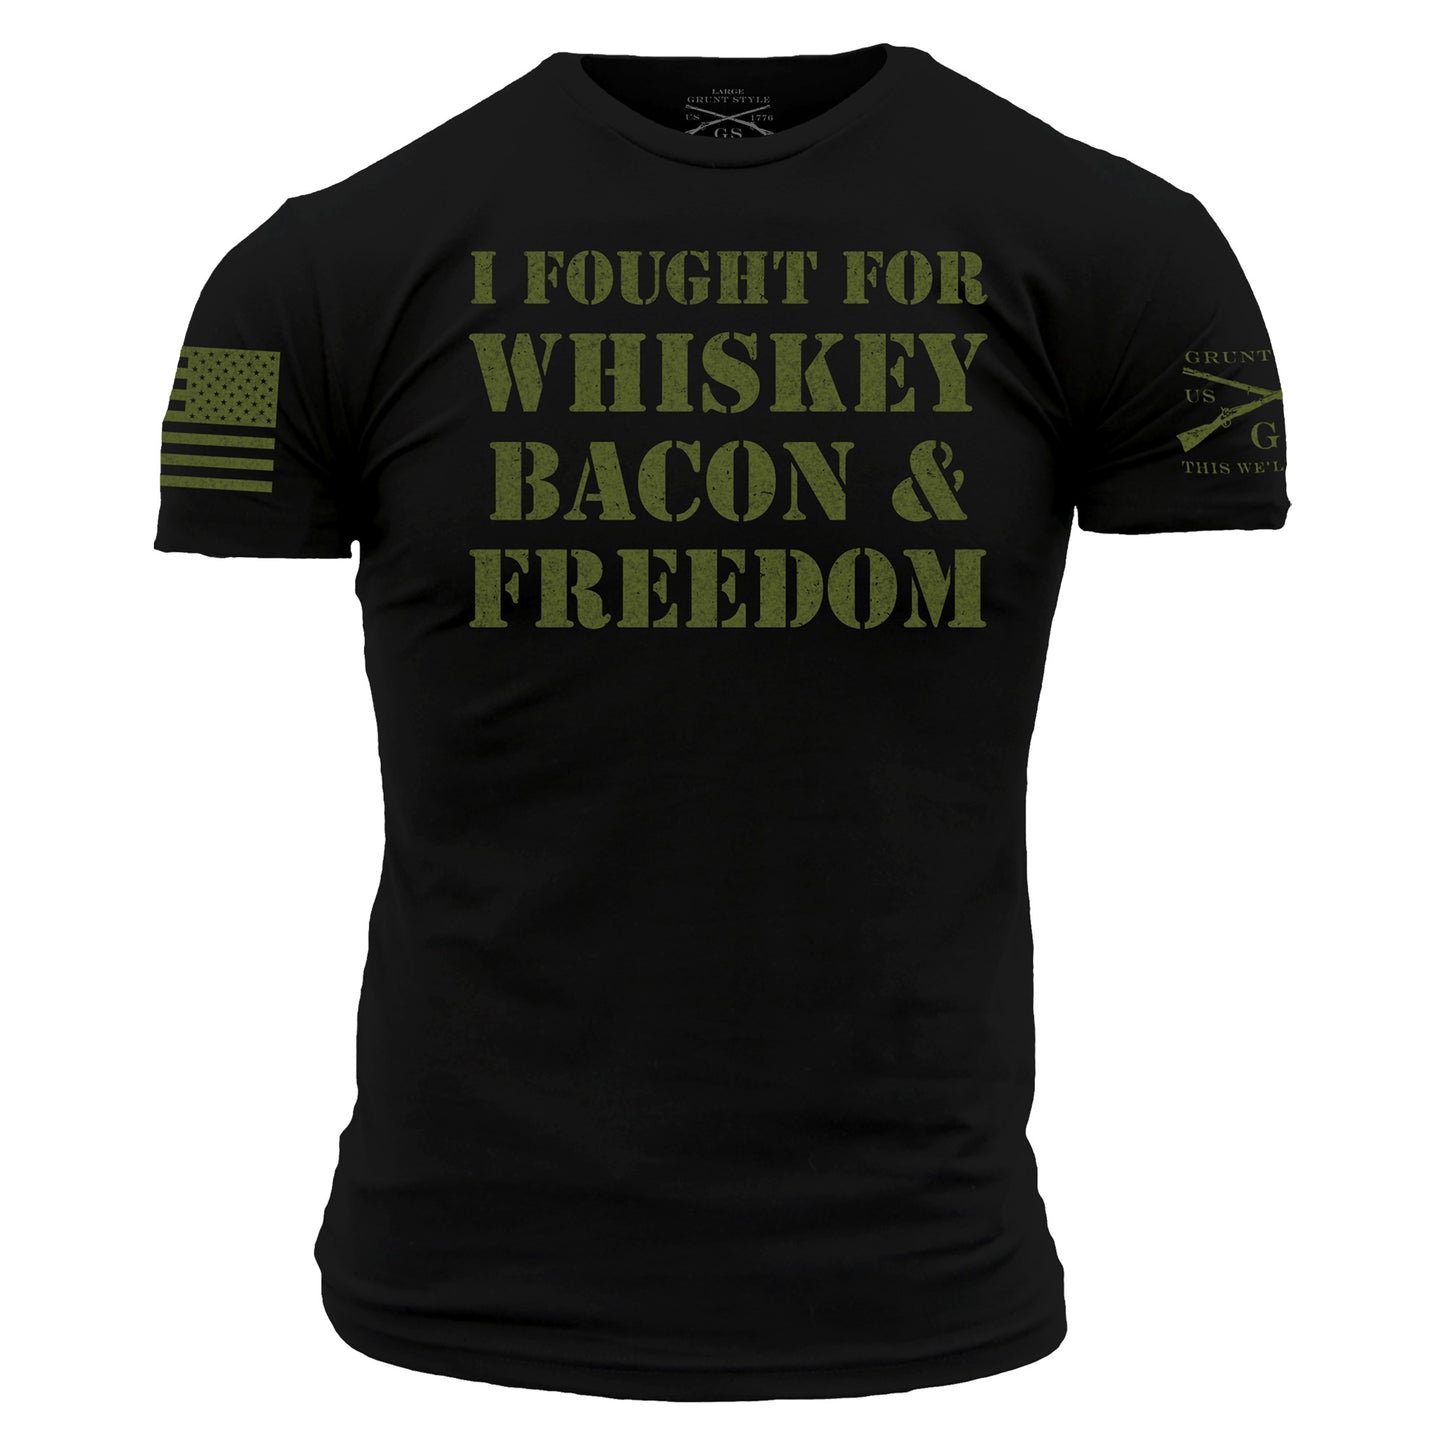 patriotic shirts for men - Whiskey Bacon Freedom 